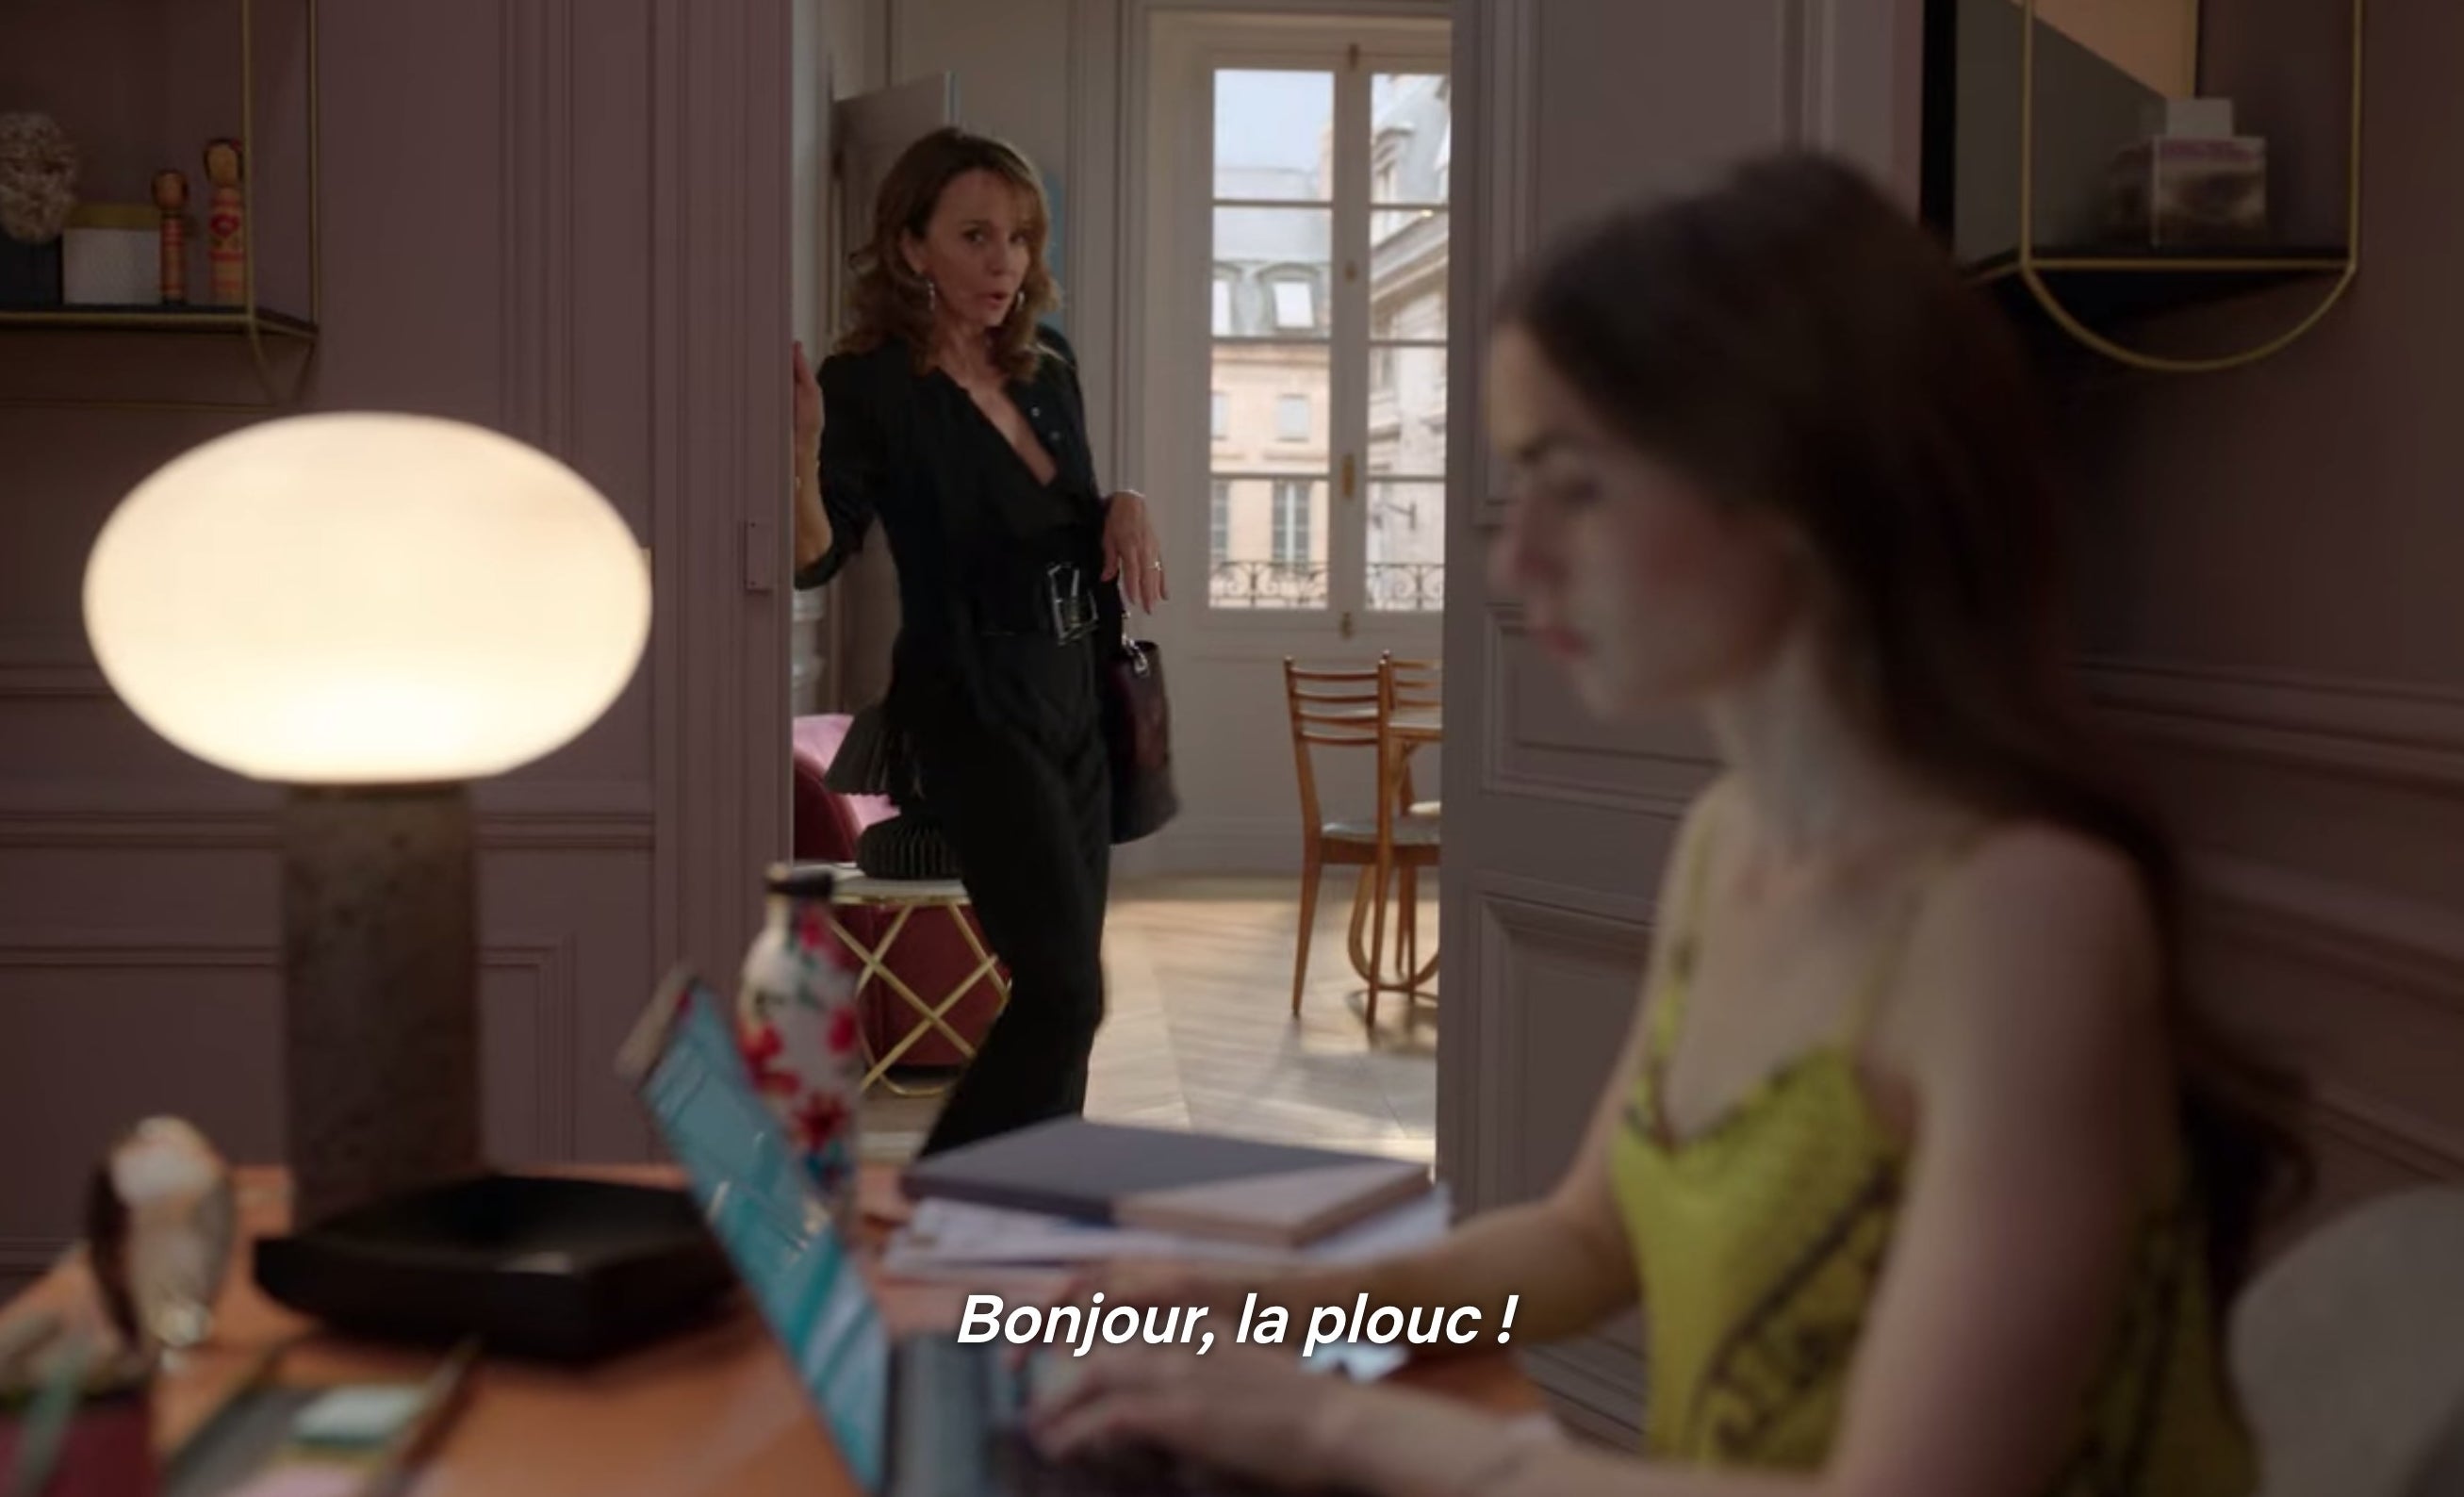 Emily being greeted at her new job with &quot;Bonjour, la plouc!&quot;